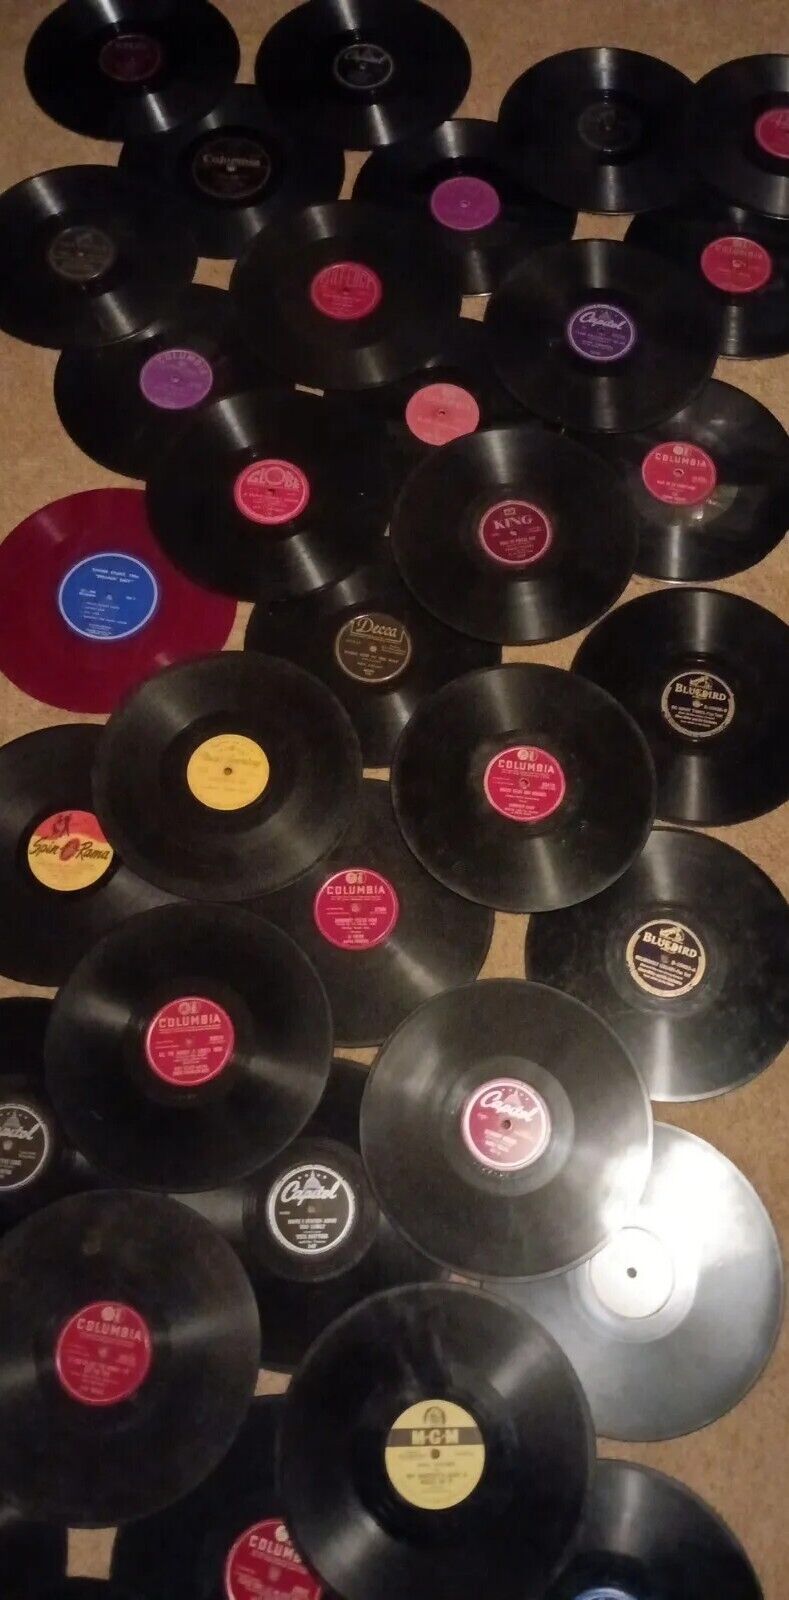 lot - 34 vintage 78 rpm records Various Labels And Artist Craft Decor